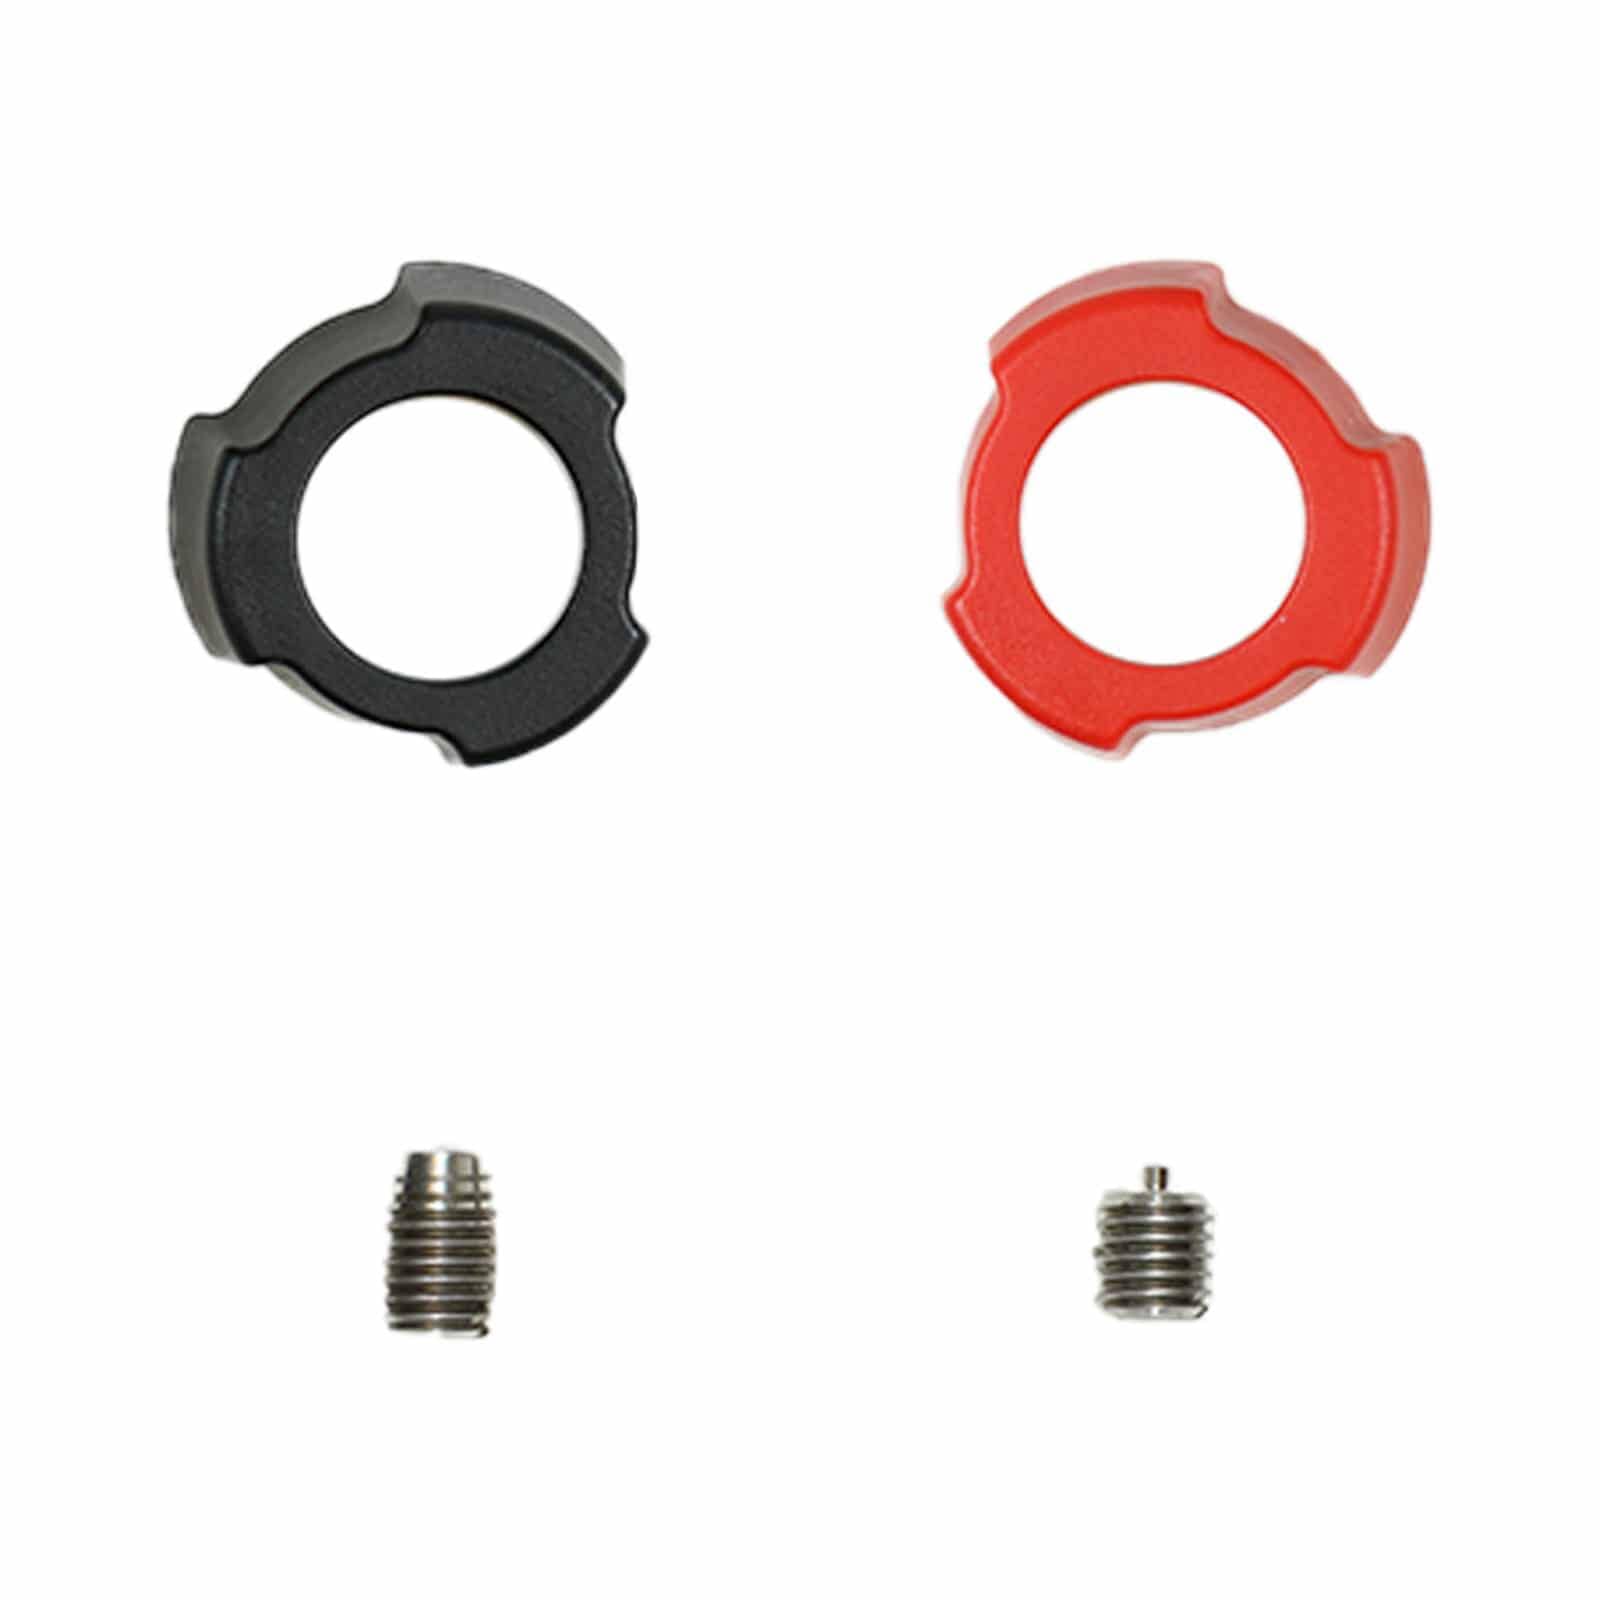 Ring tightener and screw options of folding handle control box adapter for minelab equinox metal detector 